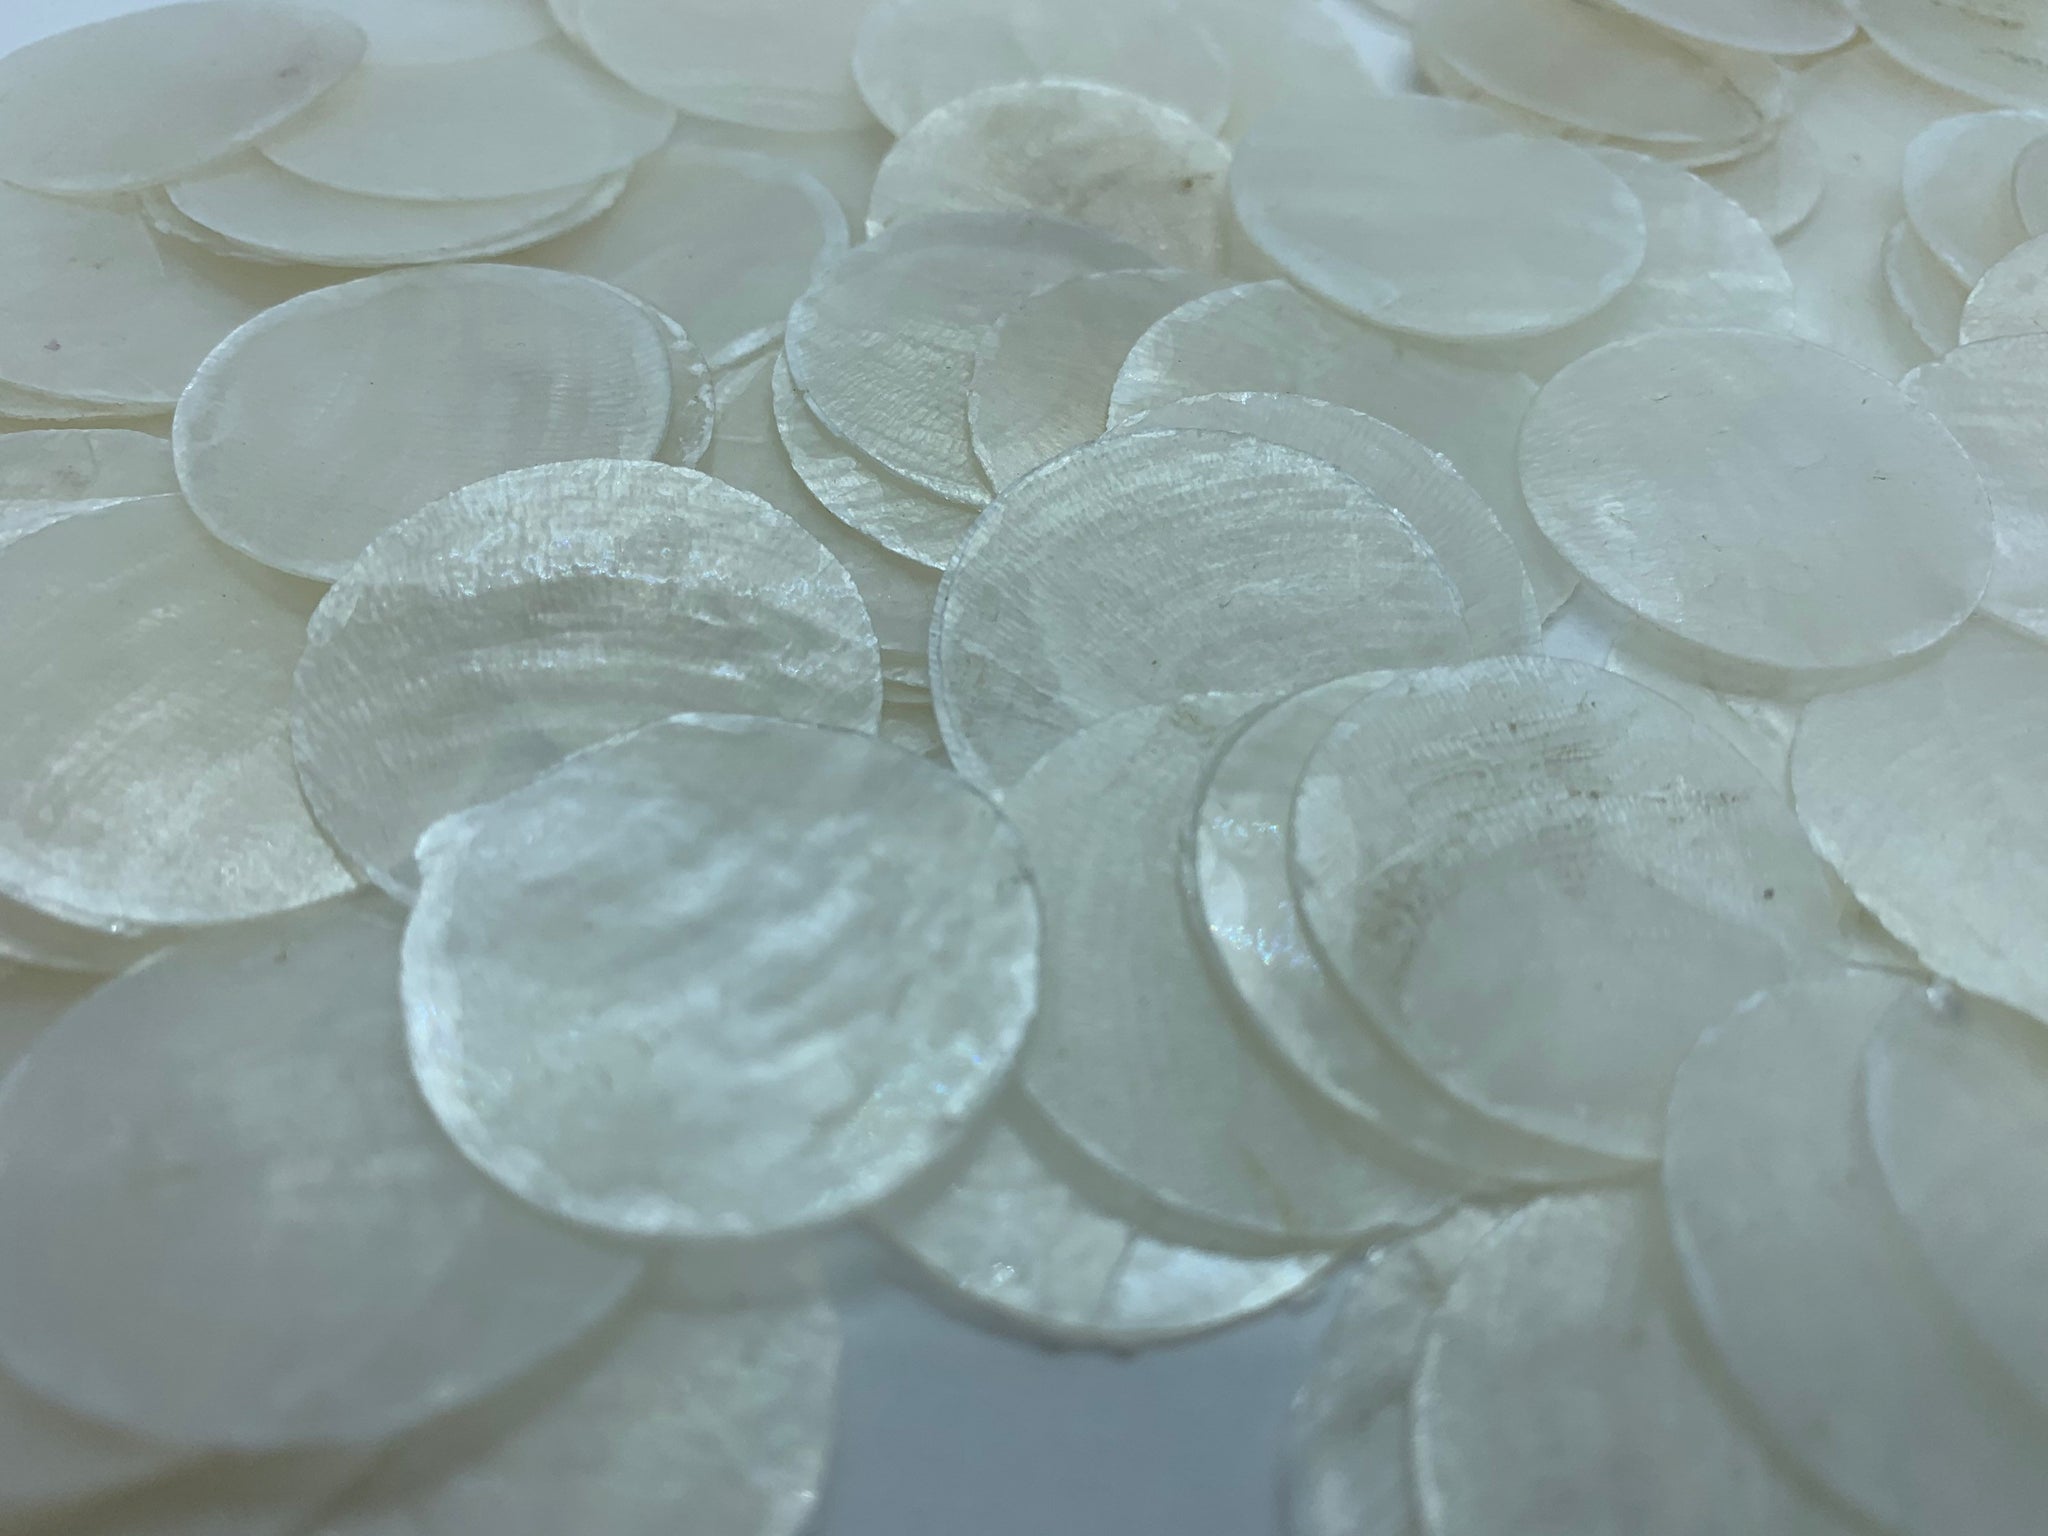  PEPPERLONELY 20 PC Round Natural Capiz Sea Shells, 2 Inch :  Home & Kitchen